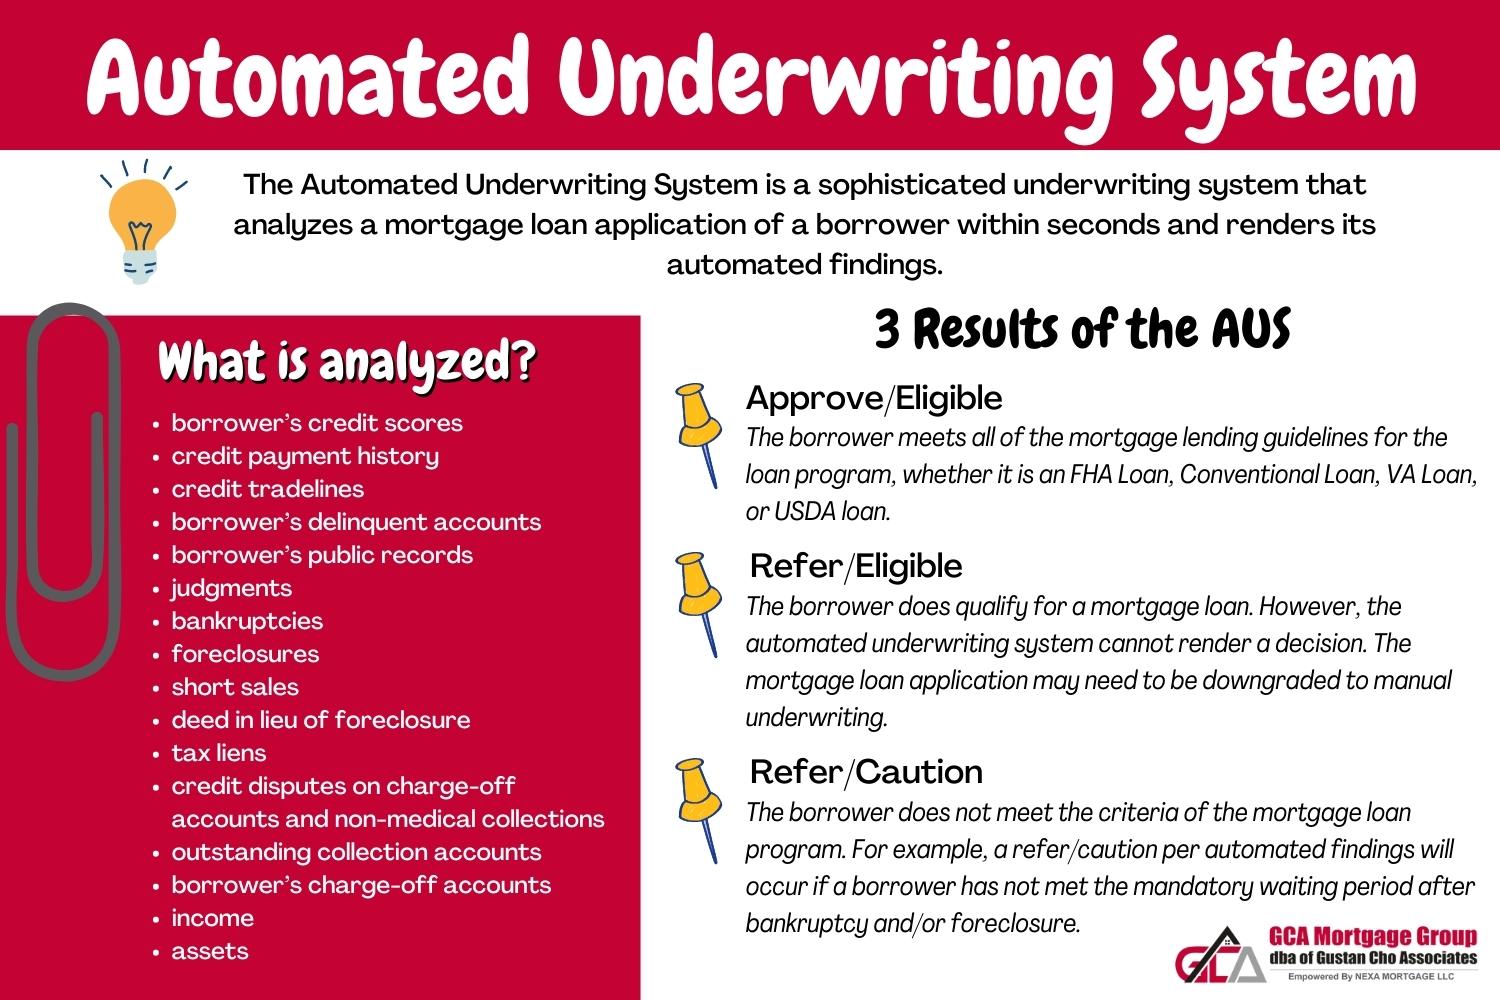 What Does Refer/Eligible Per Automated Findings Means?